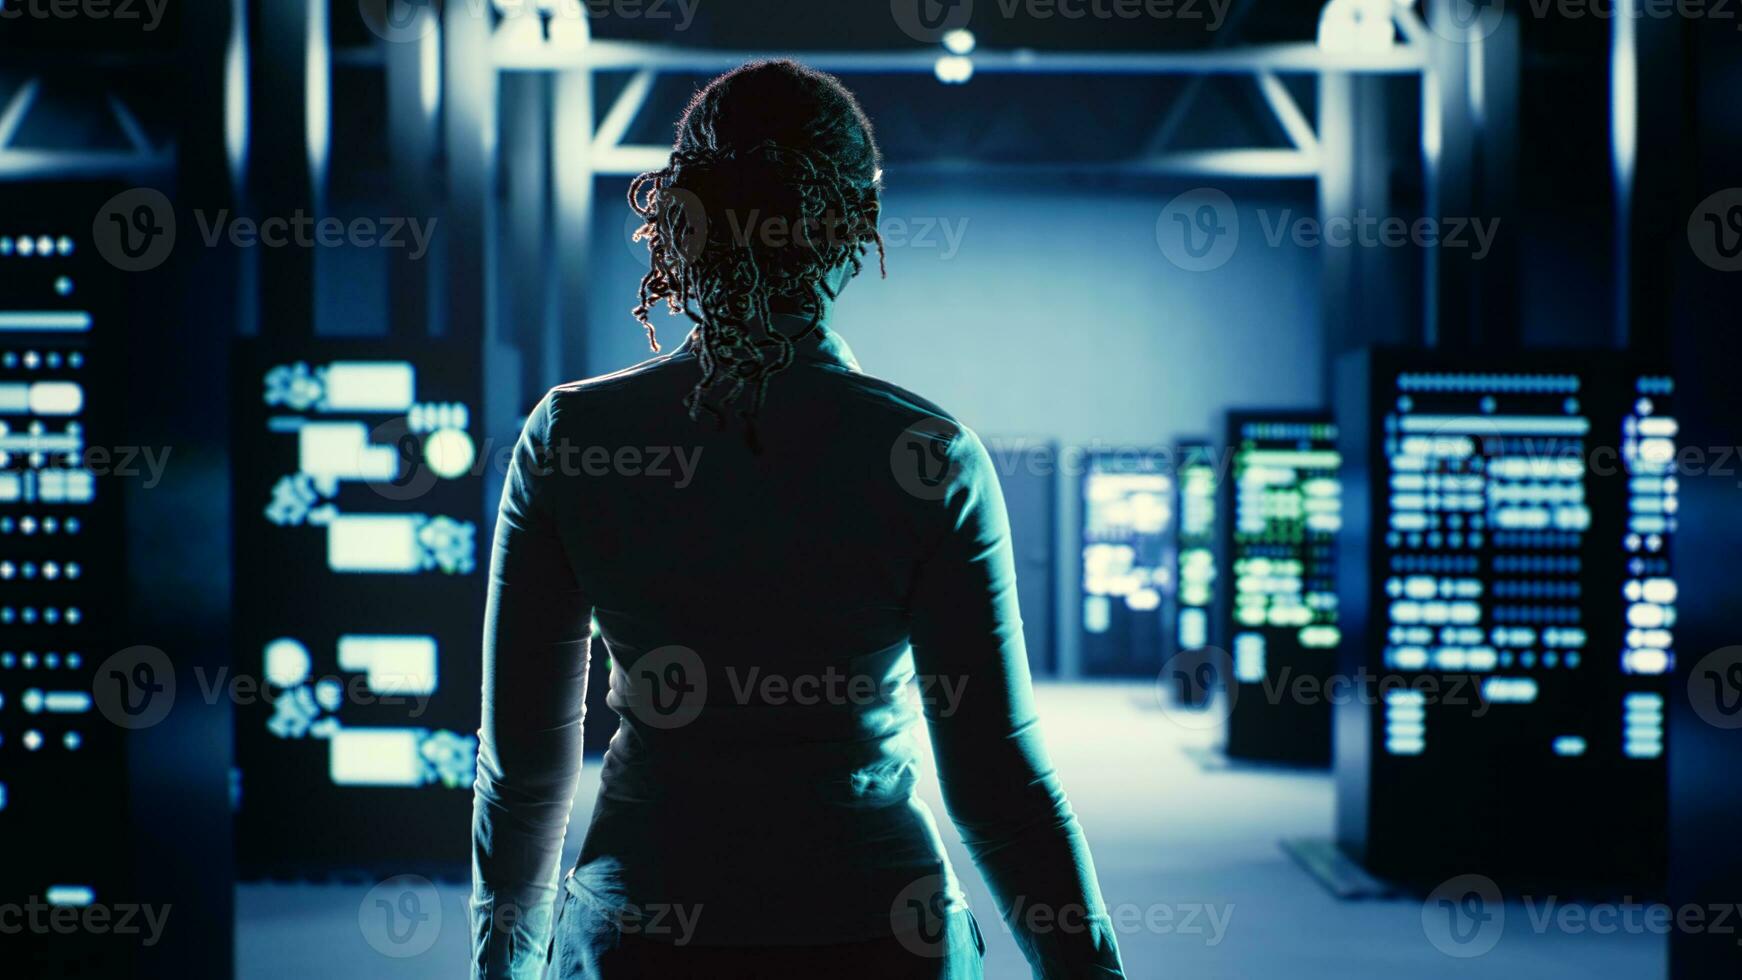 Skillful employee strolling around data center server rows, looking for damages in high tech workspace equipment designed to accommodate server units, networking systems and storage arrays photo